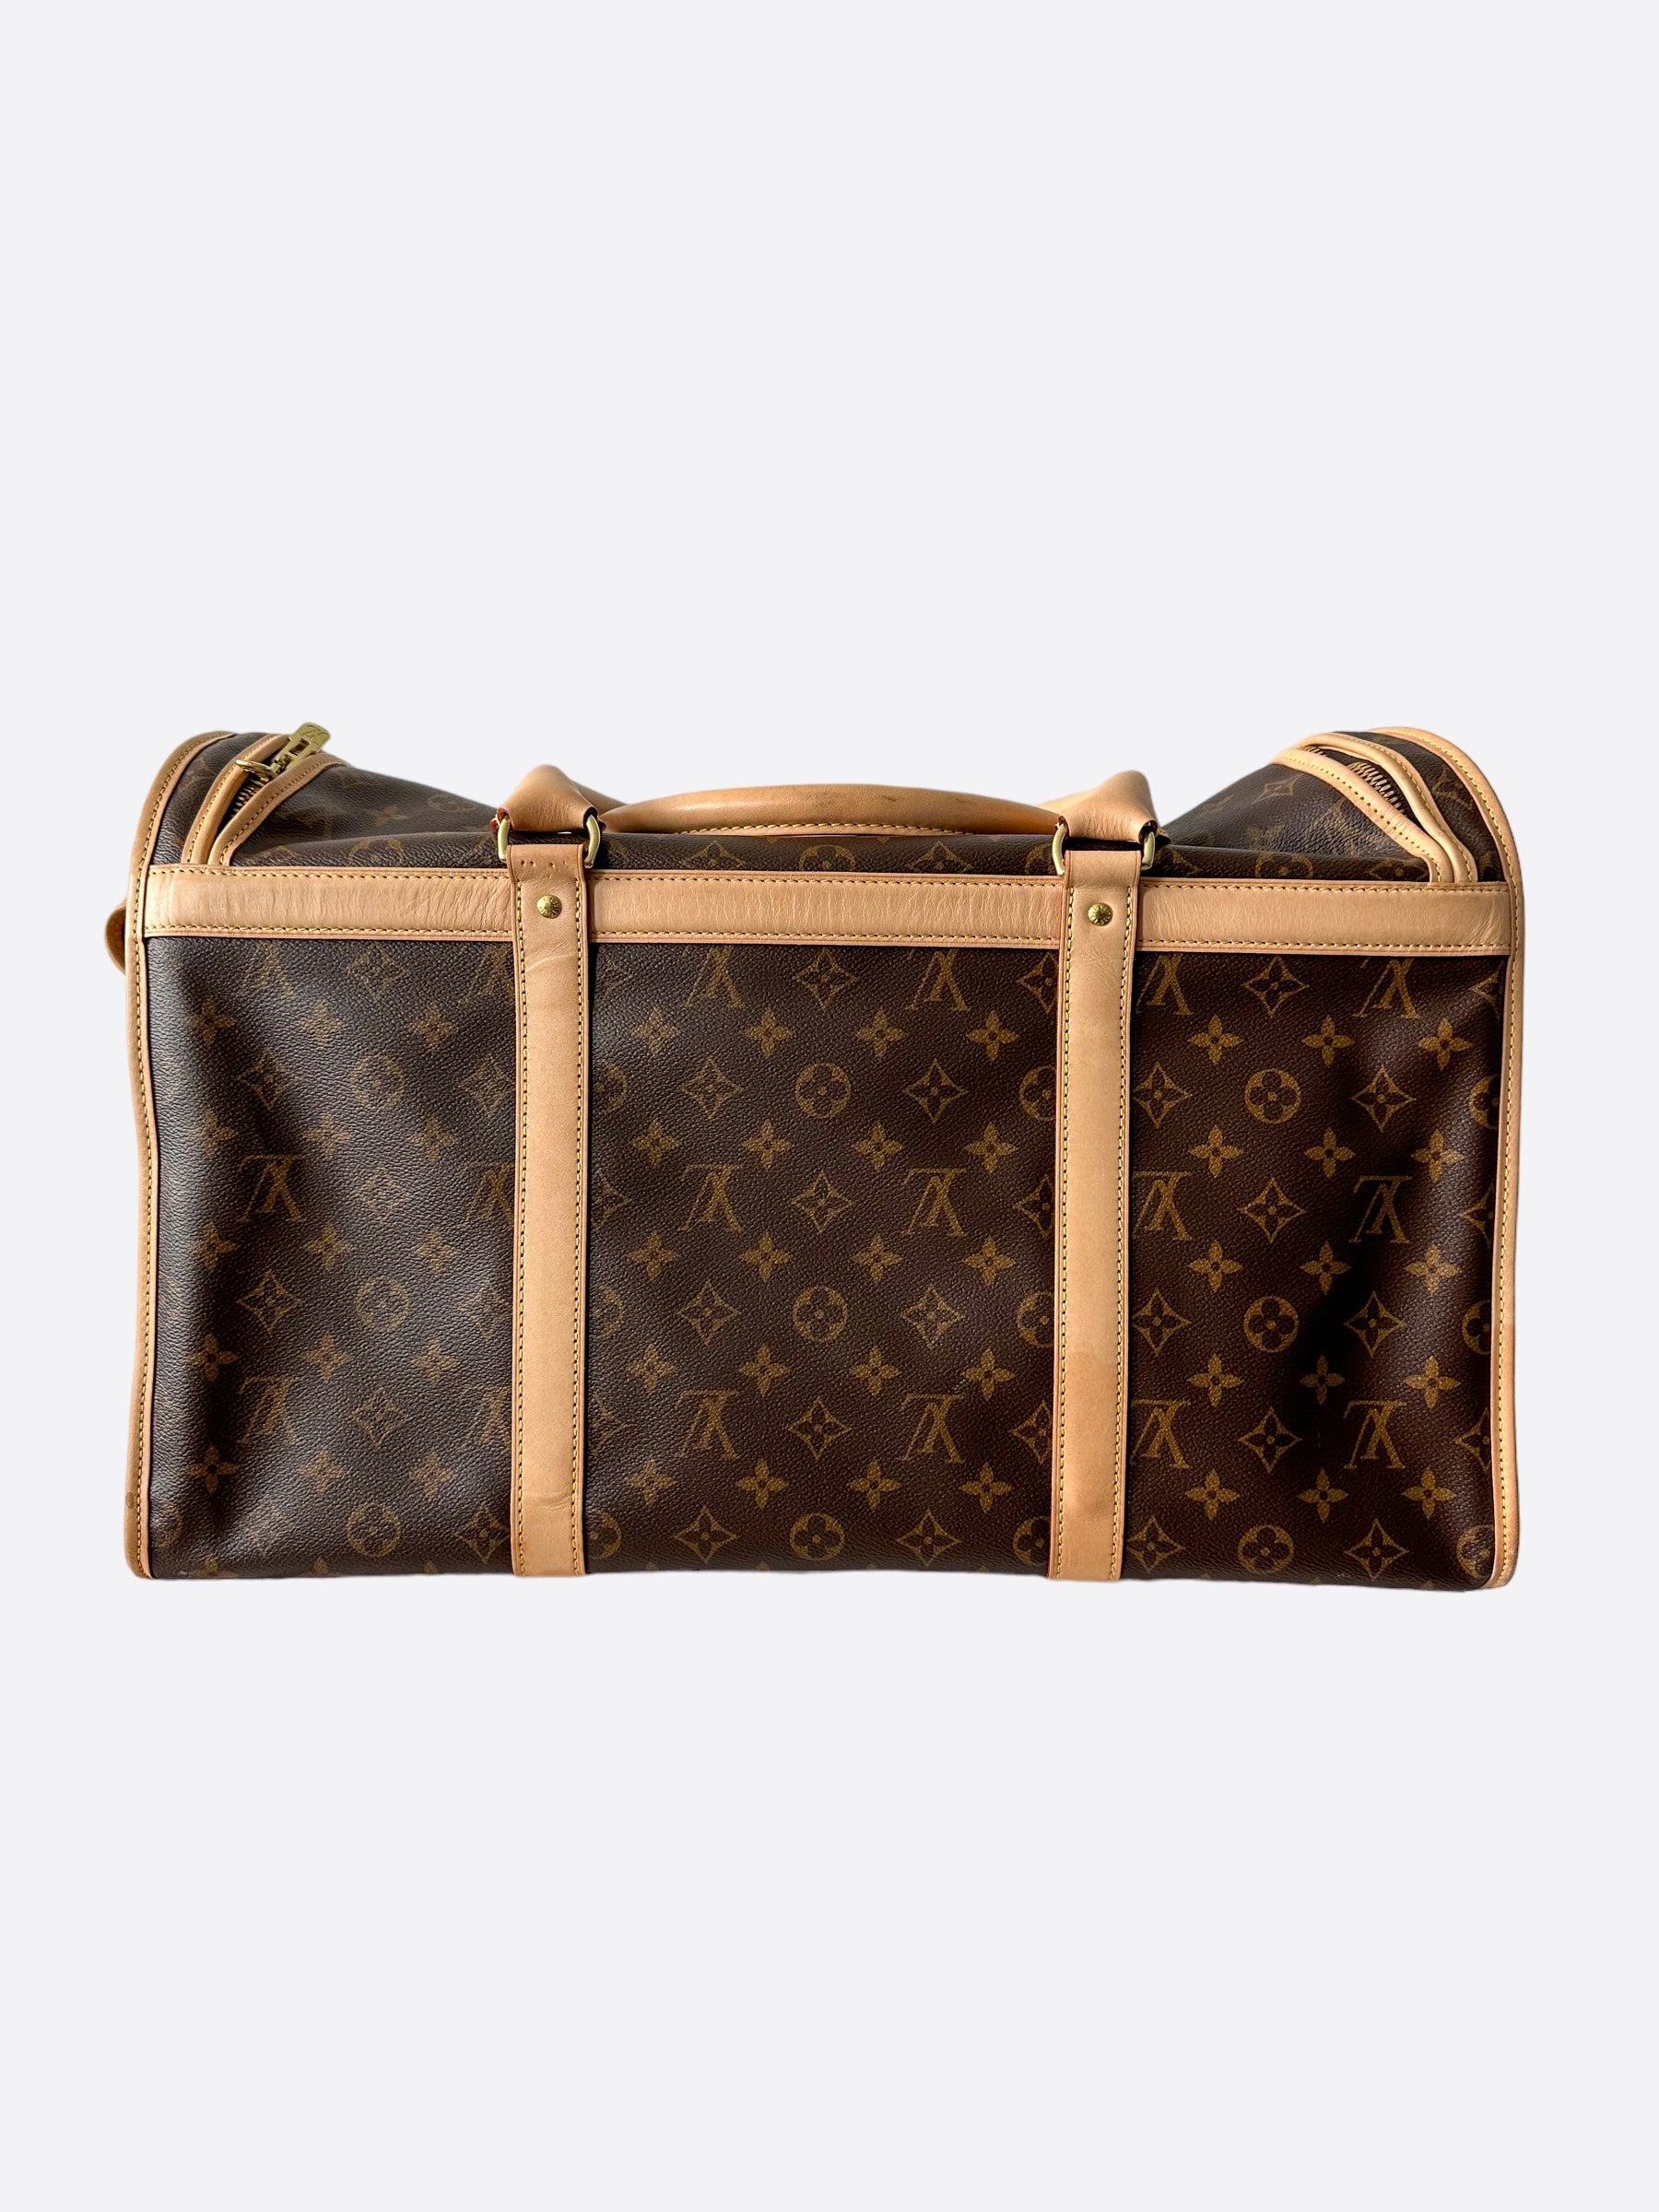 Louis Vuitton Sac chien 40 travel bag in brown monogram canvas and natural  leather, Cross Body Bags 5